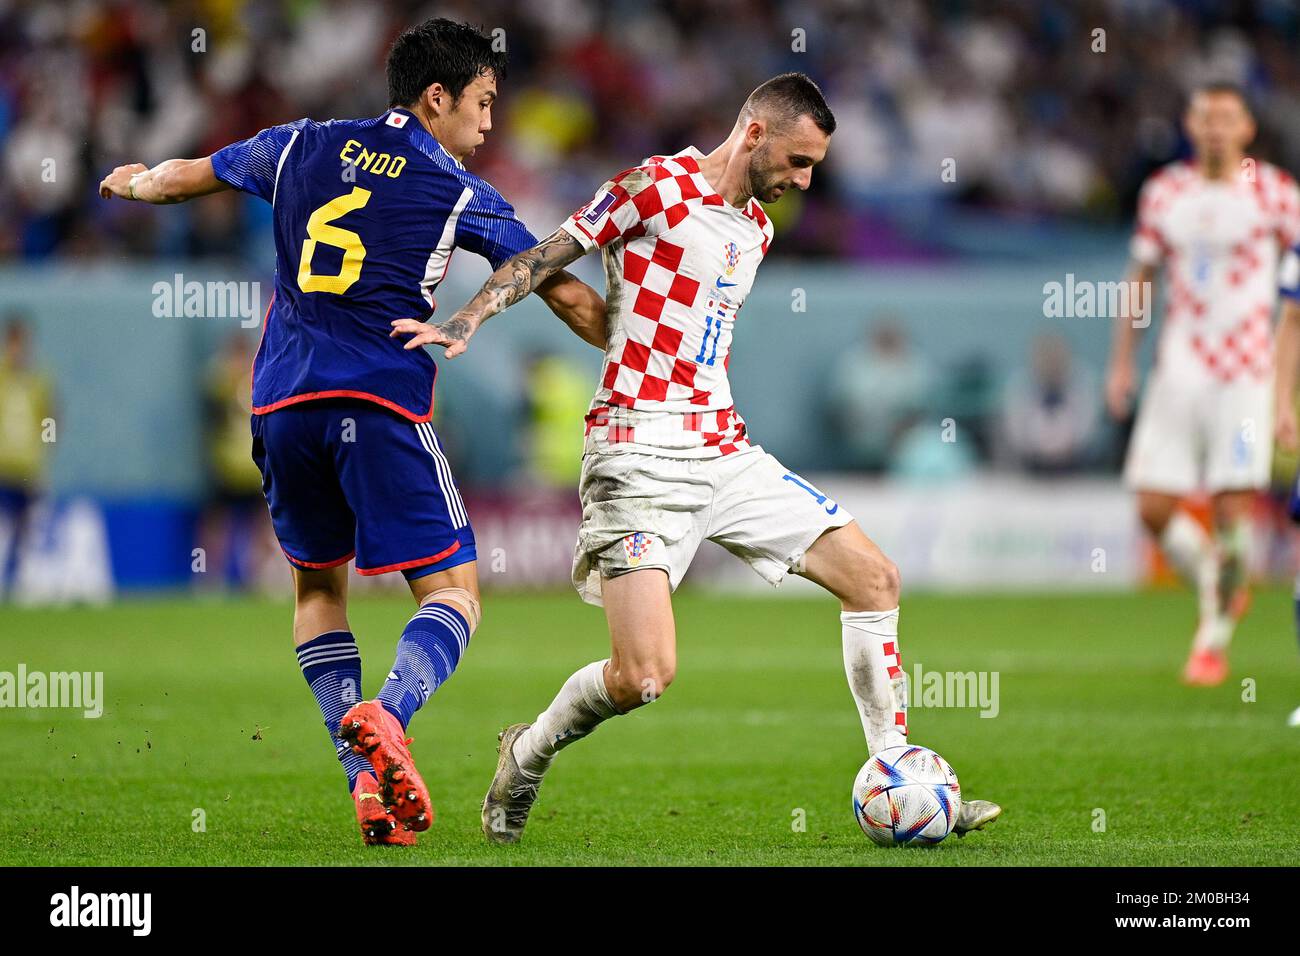 AL WAKRAH, QATAR - DECEMBER 5: Wataru Endo of Japan battles for the ball with Marcelo Brozovic of Croatia during the Round of 16 - FIFA World Cup Qatar 2022 match between Japan and Croatia at the Al Janoub Stadium on December 5, 2022 in Al Wakrah, Qatar (Photo by Pablo Morano/BSR Agency) Stock Photo